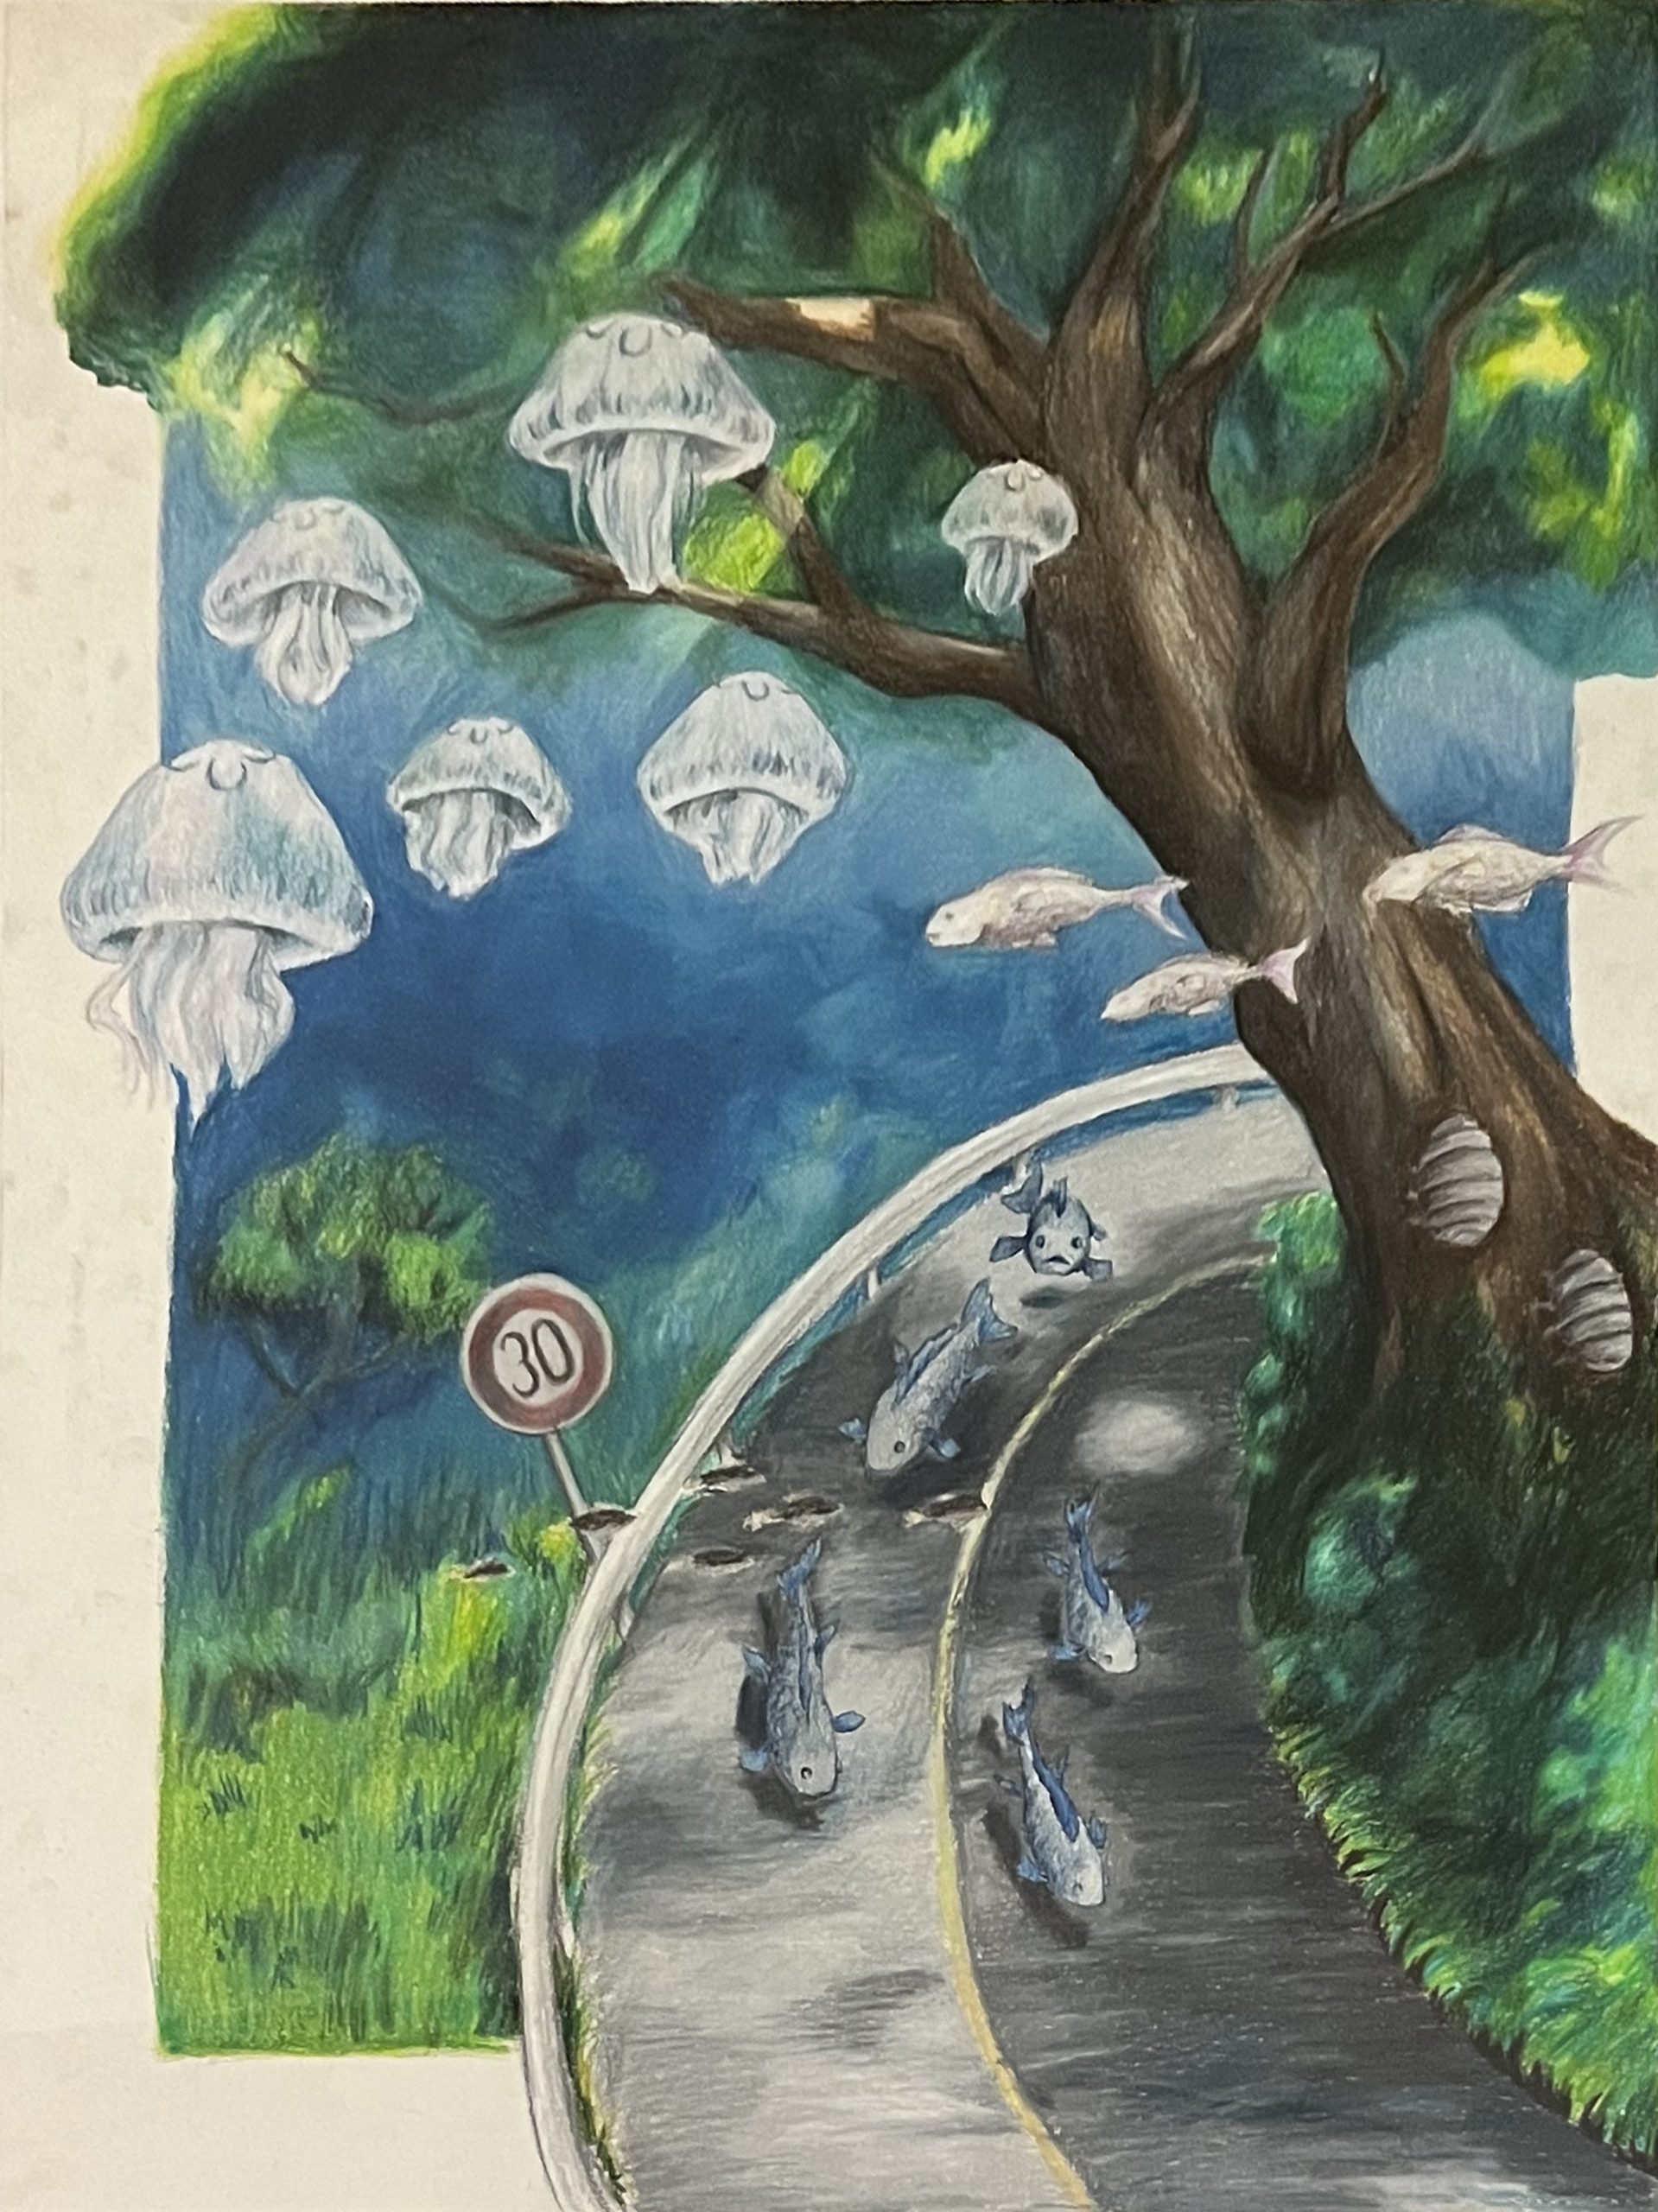 Silver/blue jellyfish float in the sky and fish of the same color travel down a curved road with grass on either side. There is a tree on the right leaning over the road with other fish floating in front of it.